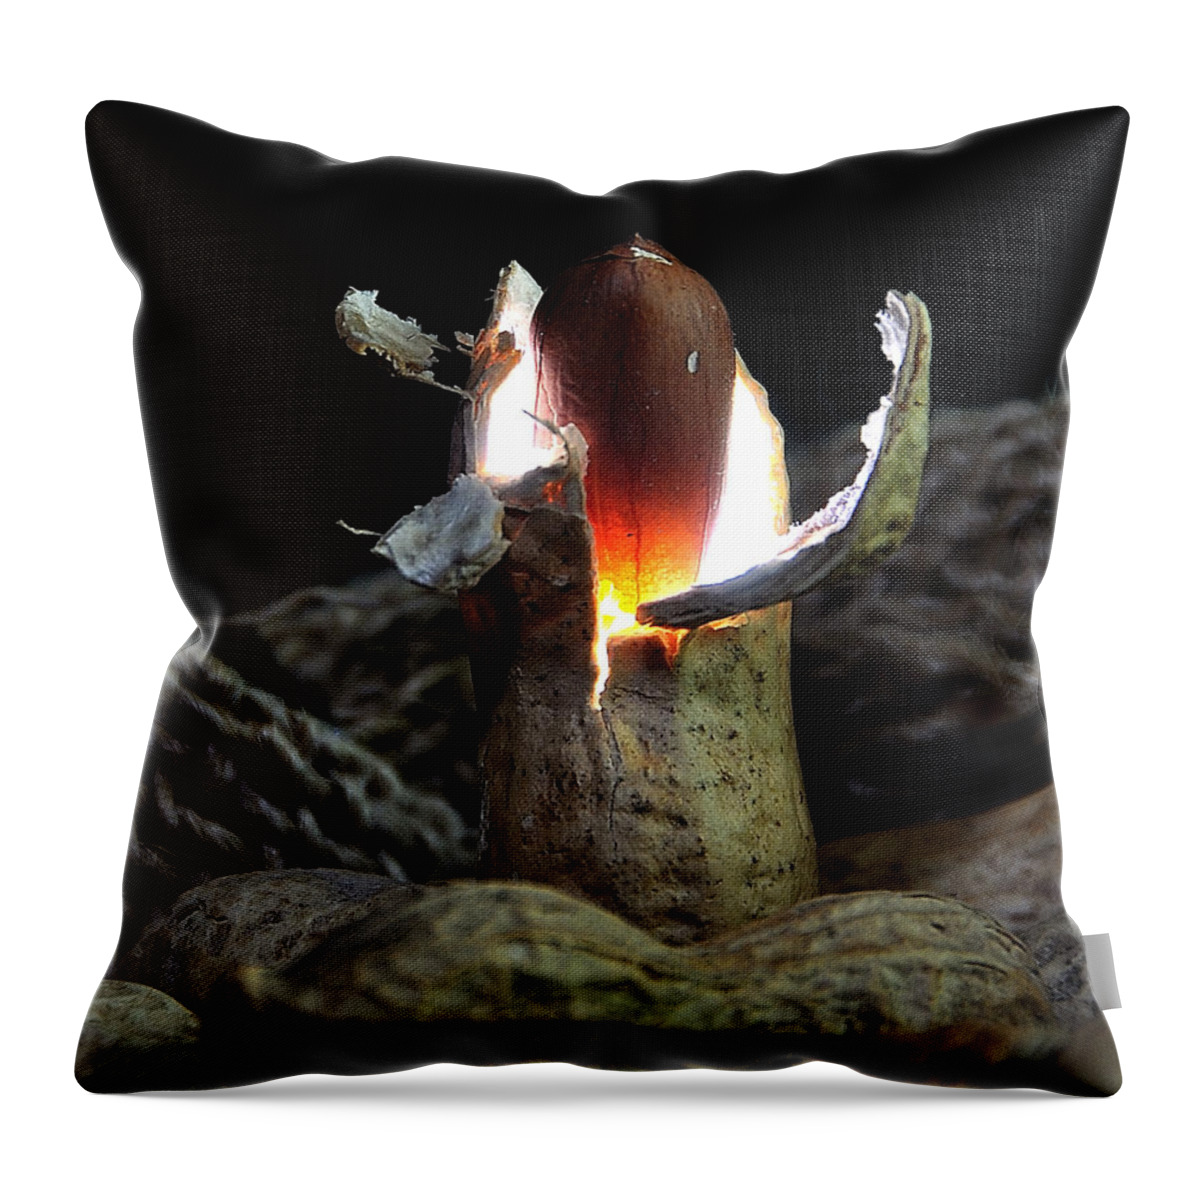 Peanut Throw Pillow featuring the photograph Power Peanut by Mark Fuller